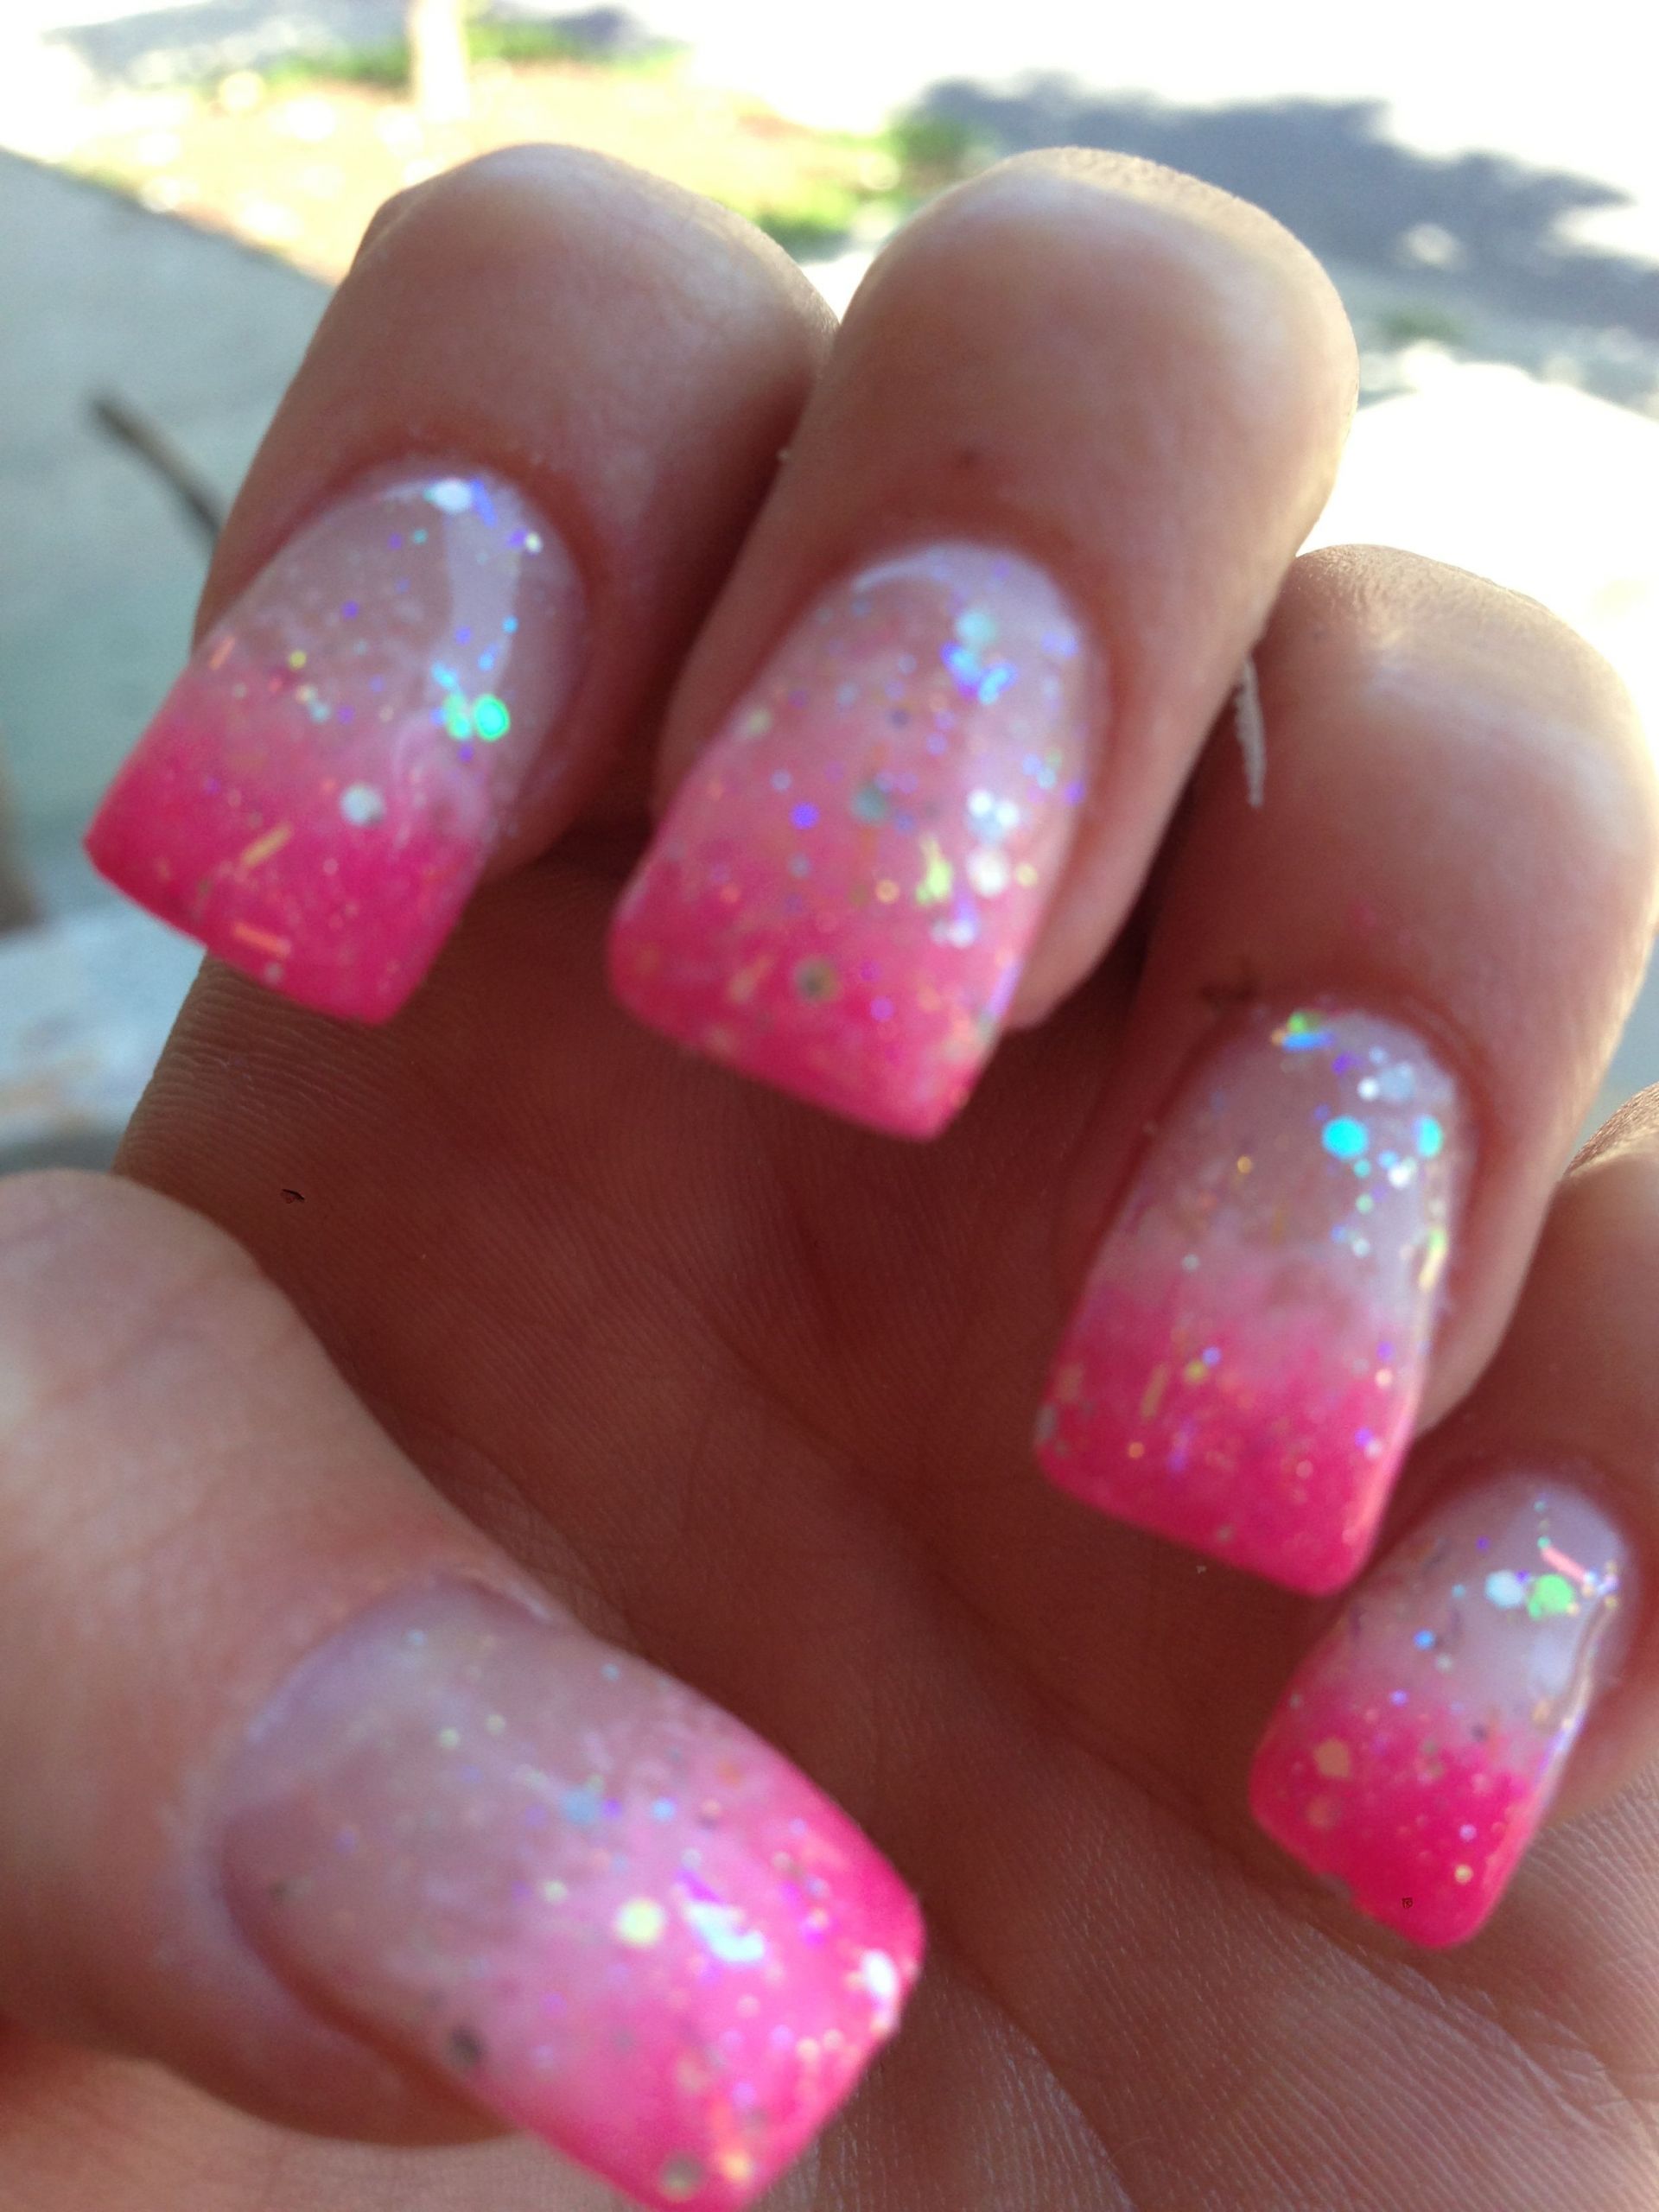 Hot Pink Nails With Glitter
 Glitter Hot Pink Ombre Nails NailsTip